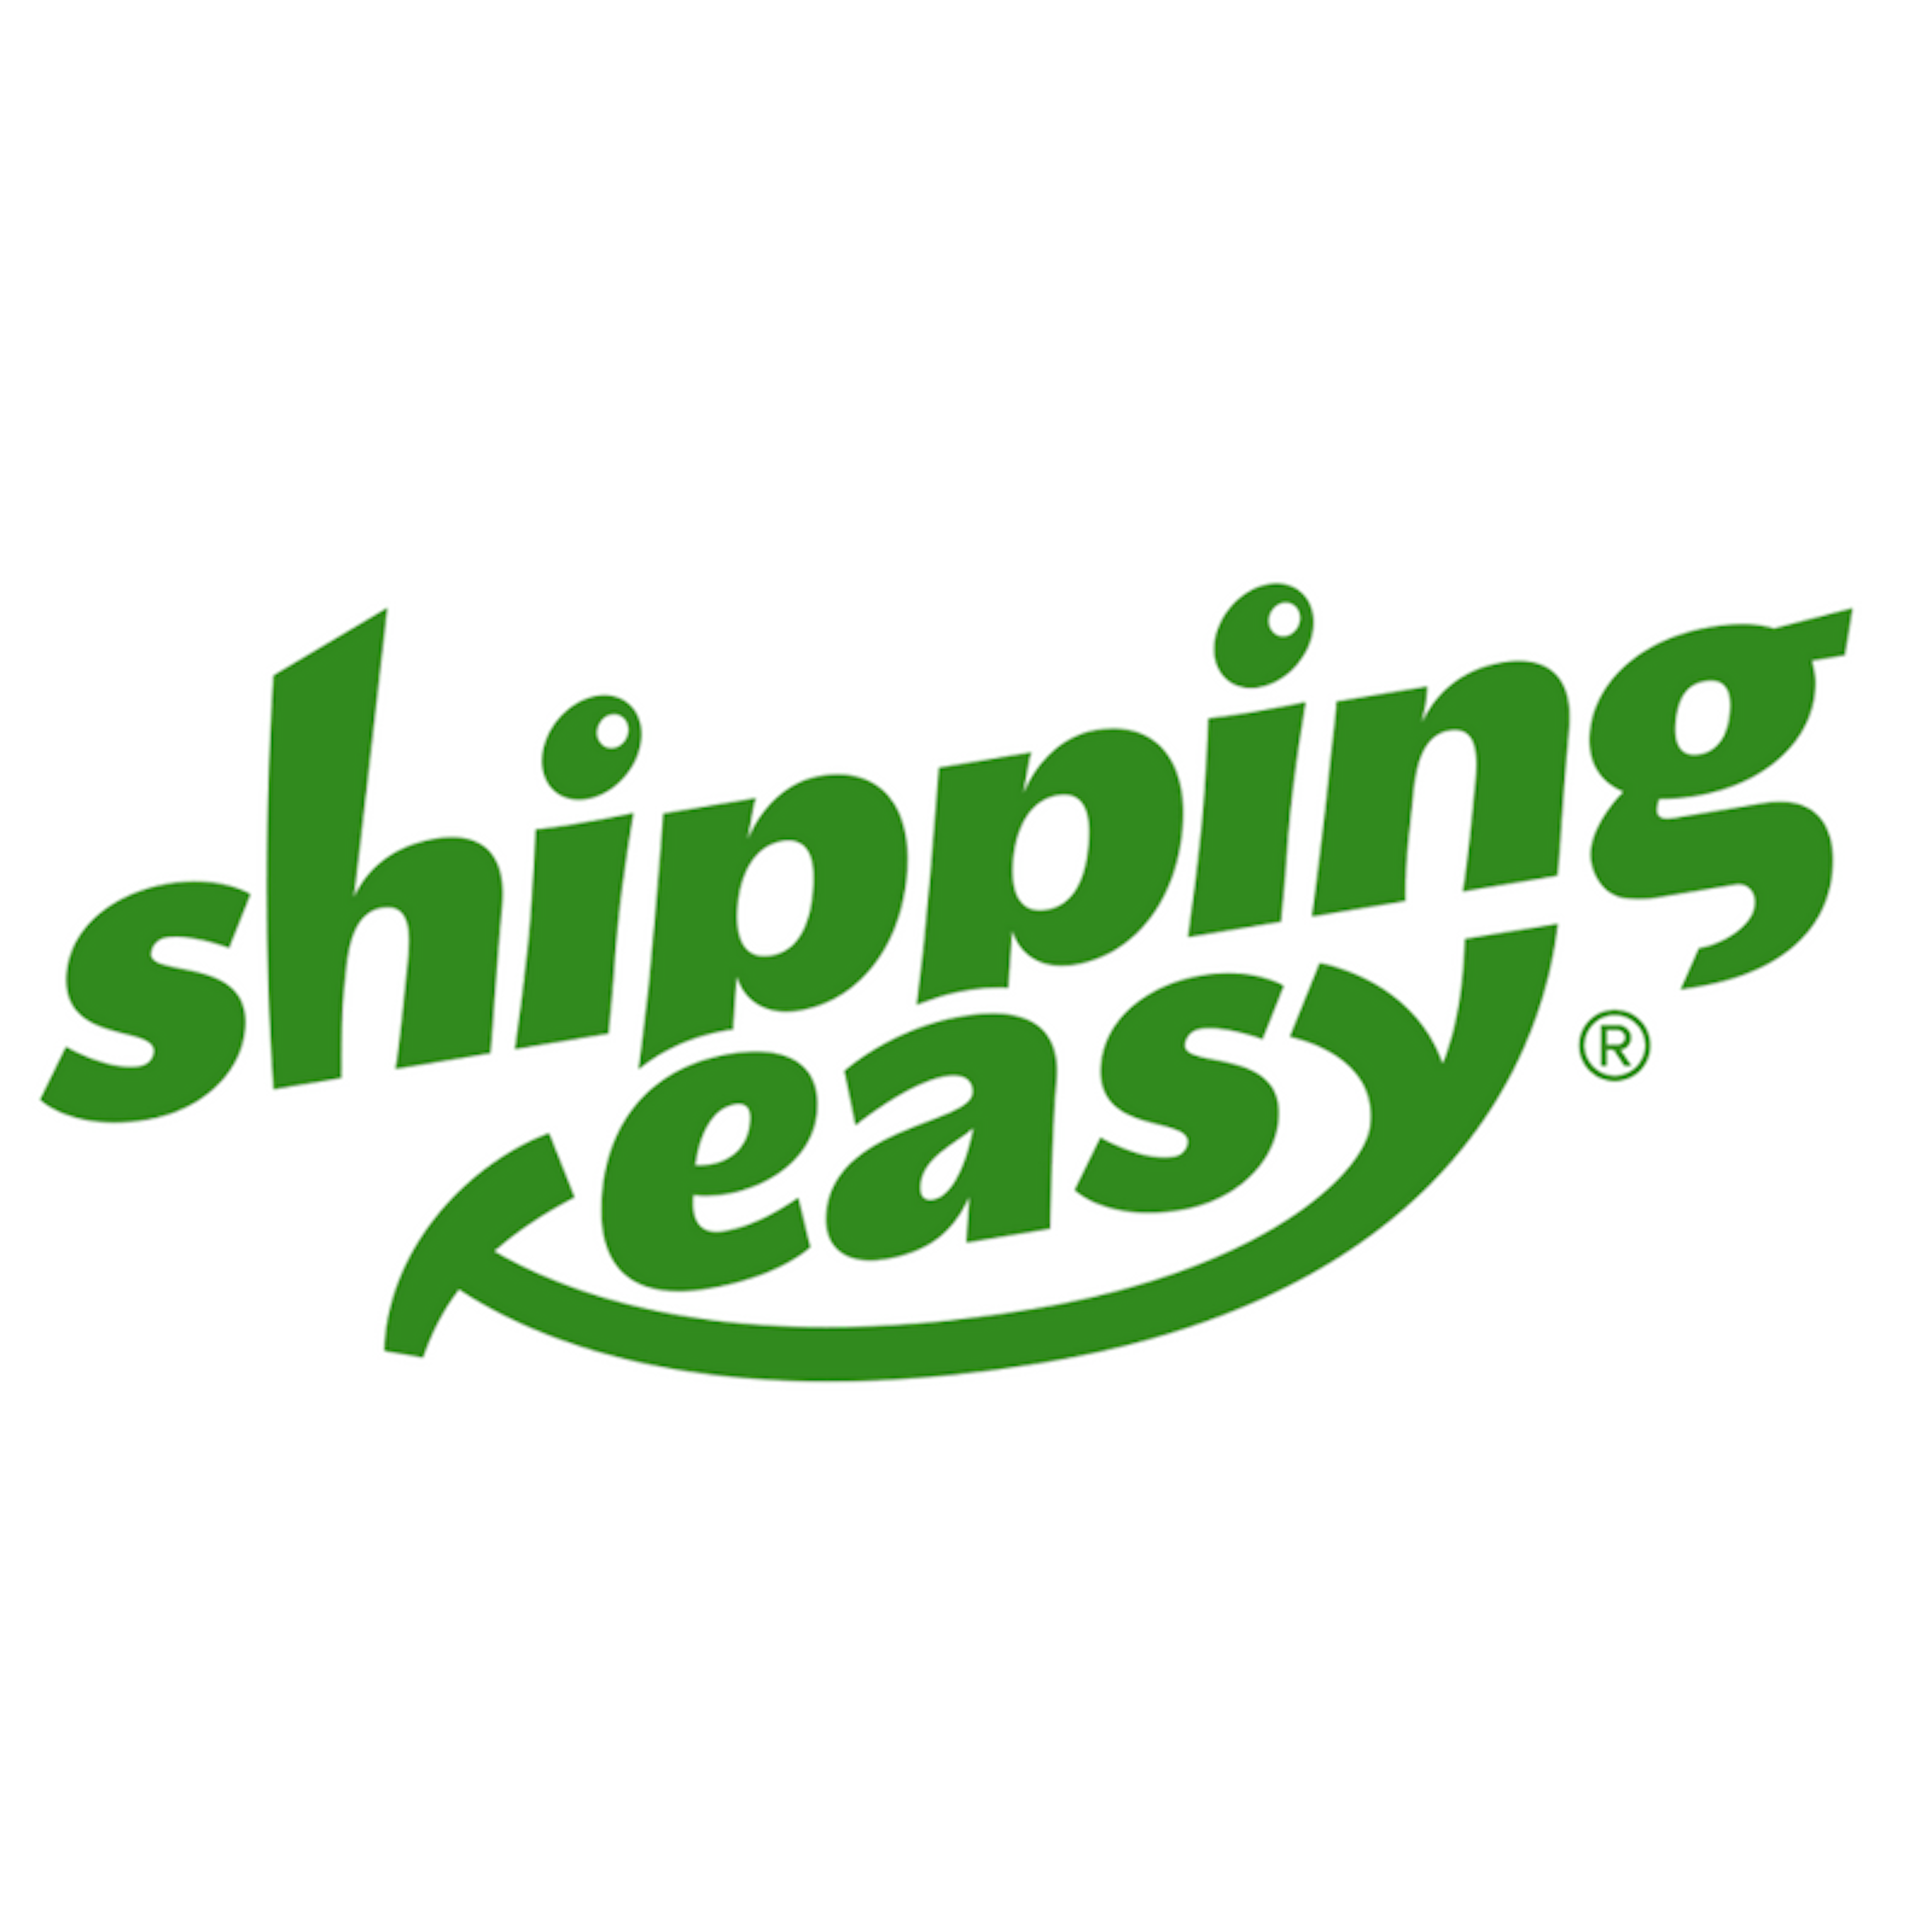 Shippingeasy Pricing Features Reviews And Alternatives Getapp 1955